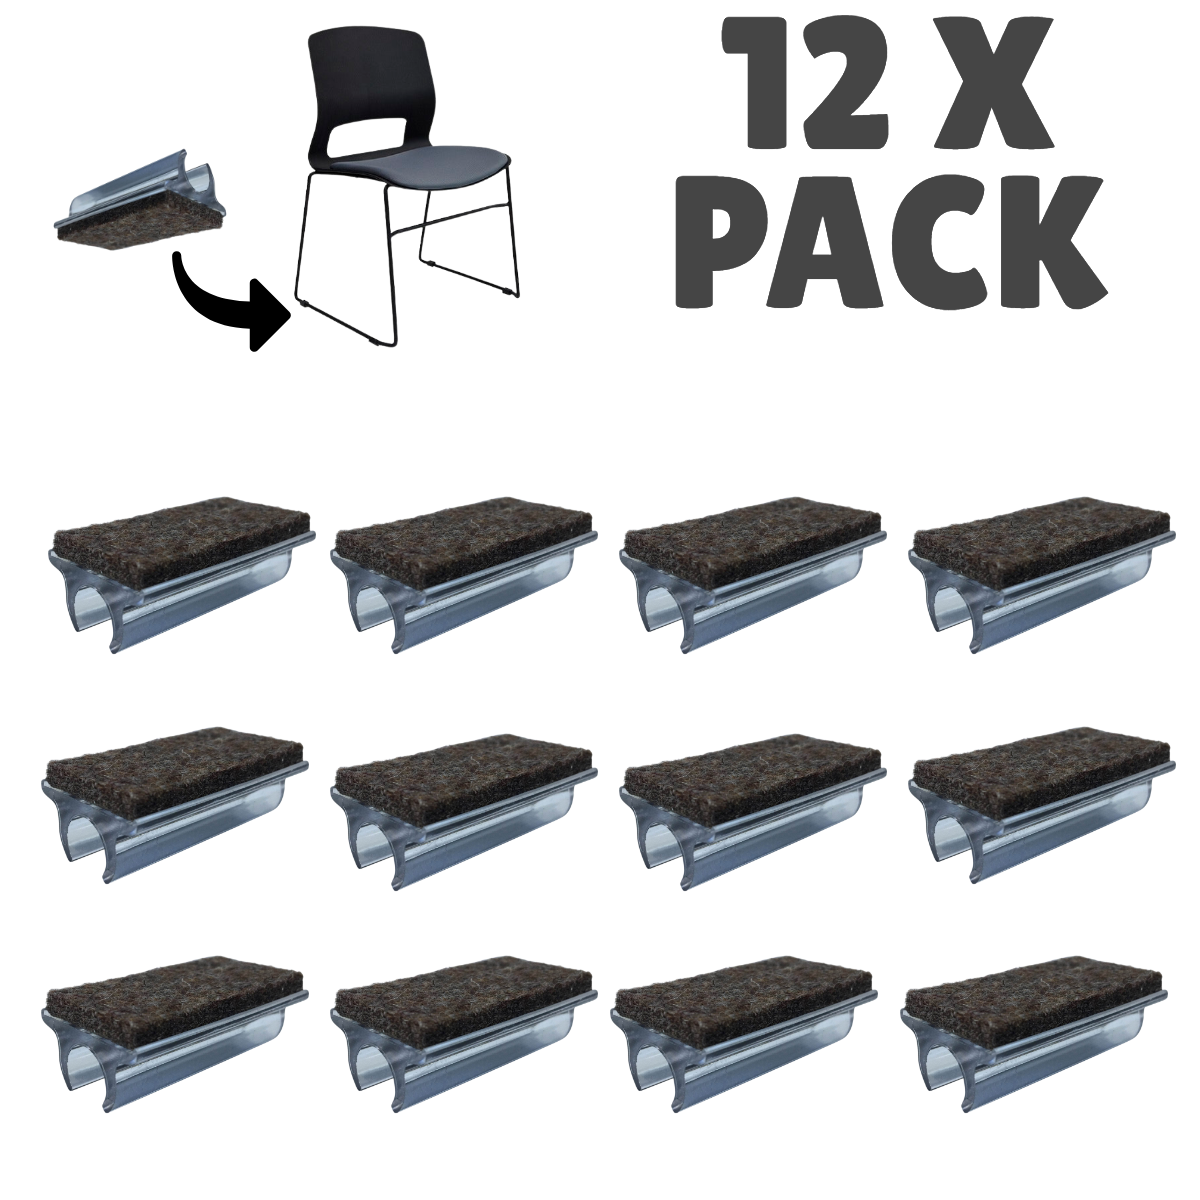 Sled Based Chair Glides (Pack Saver)